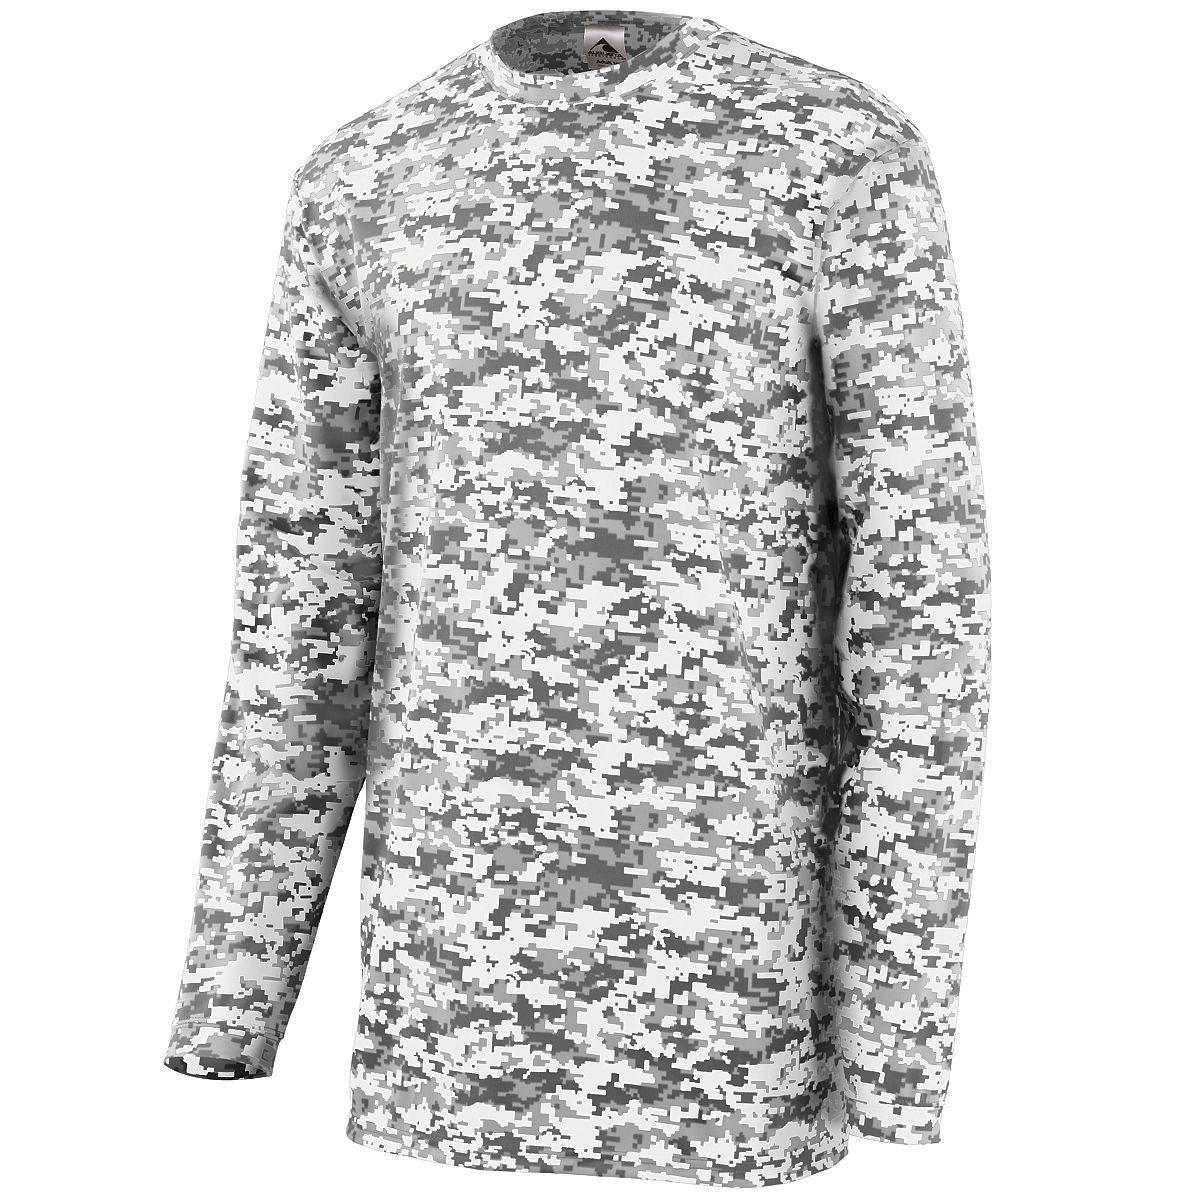 Augusta Sportswear Youth Digi Camo Wicking Long Sleeve T-Shirt in White Digi  -Part of the Youth, Youth-Tee-Shirt, T-Shirts, Augusta-Products, Shirts product lines at KanaleyCreations.com